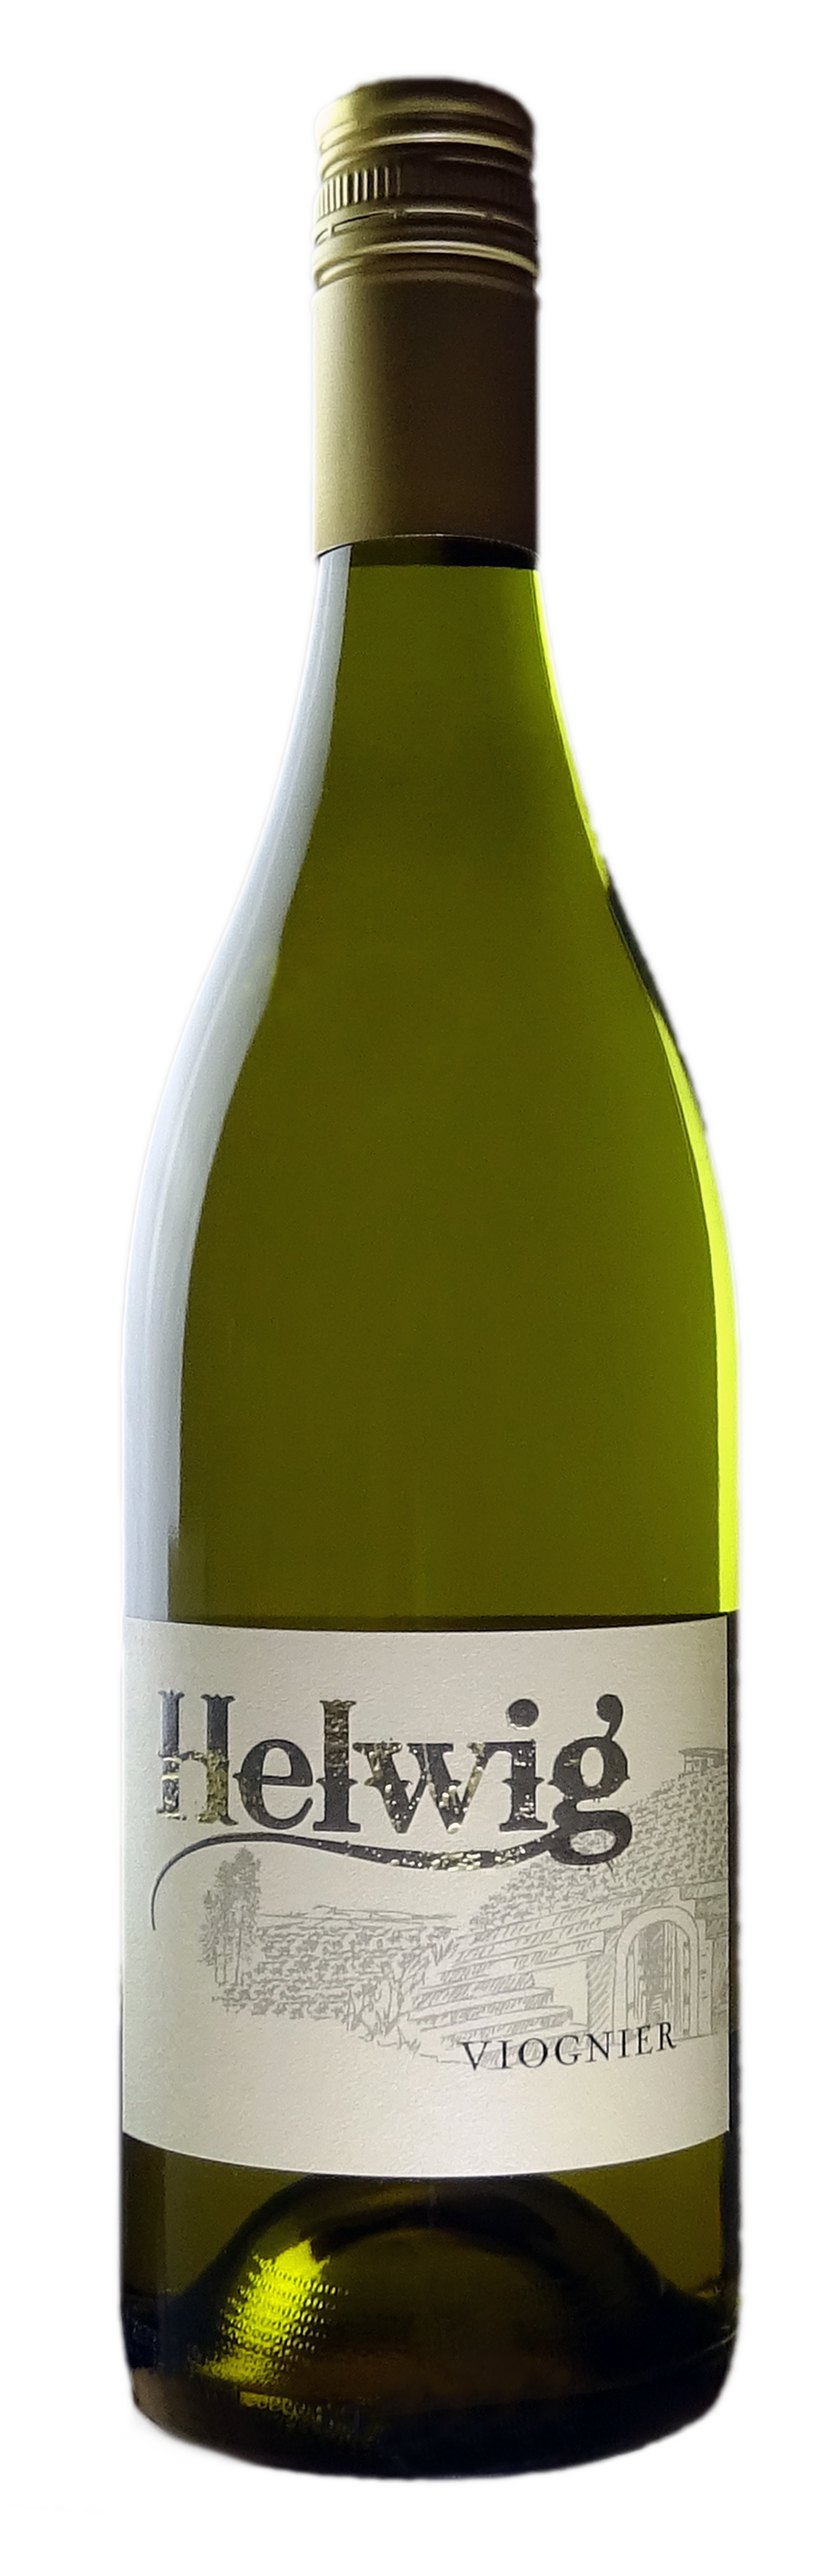 Product Image for Viognier '21